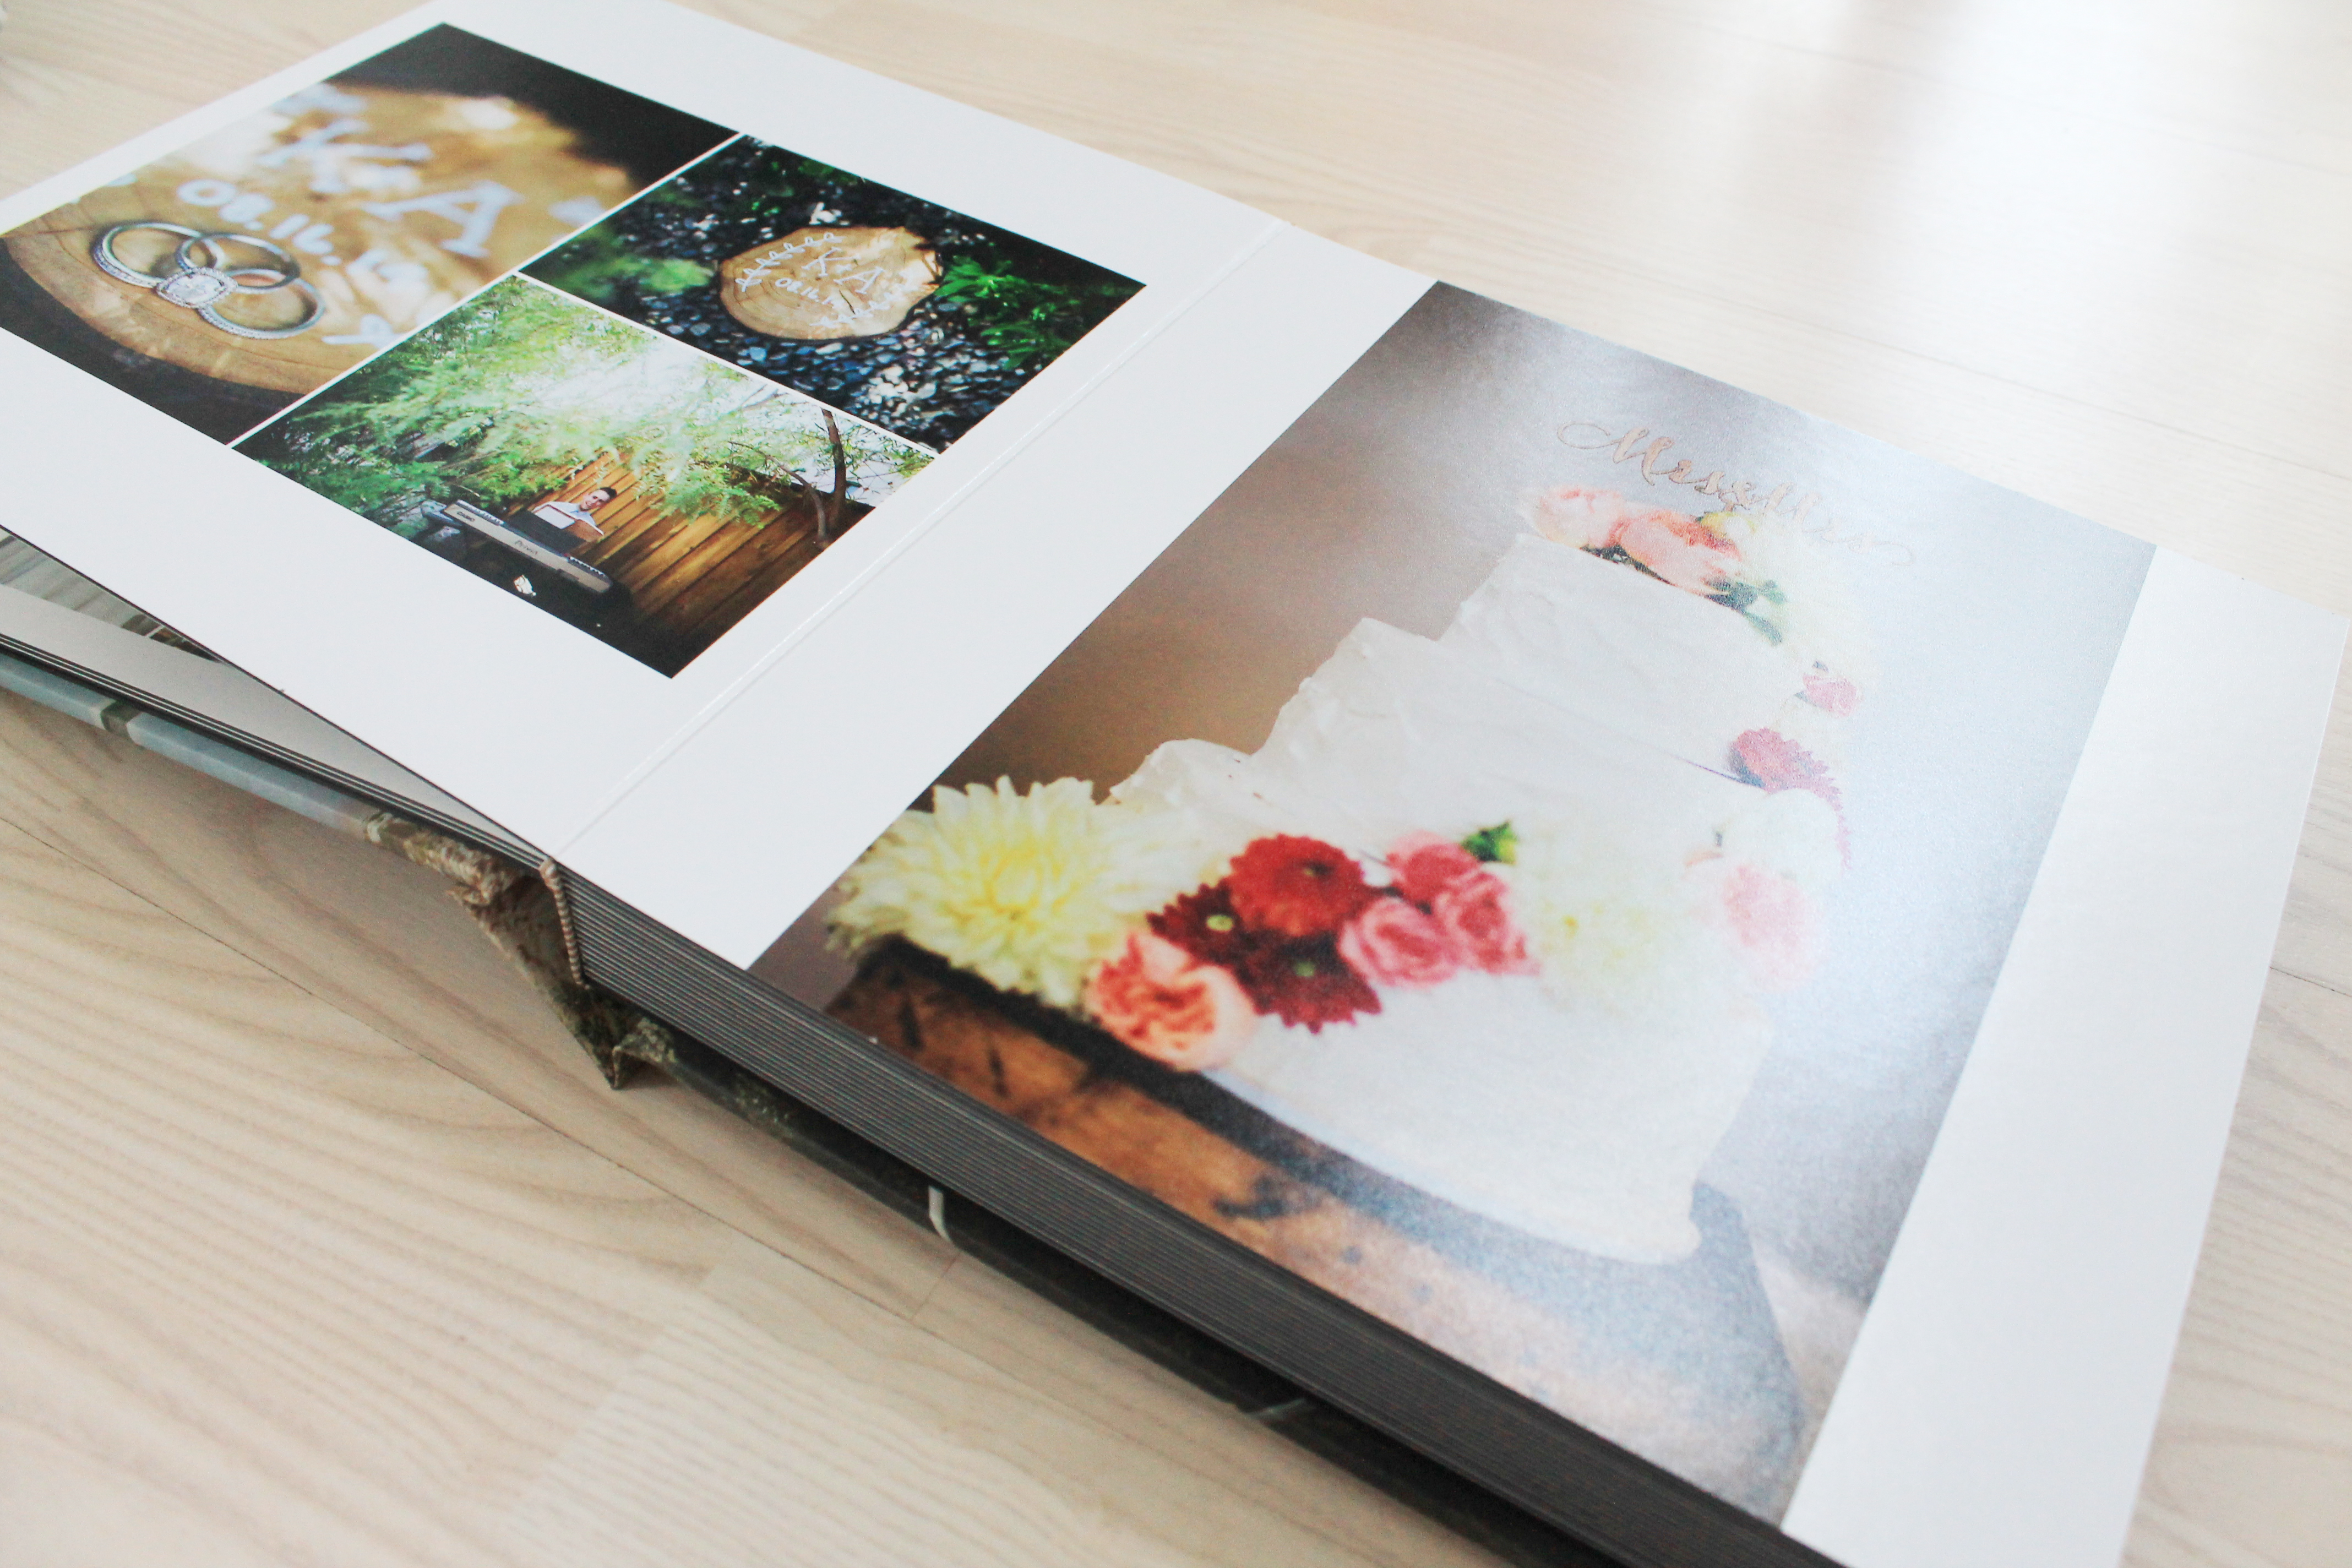 The High Quality Yet Affordable Wedding Albums You Ve Been Waiting